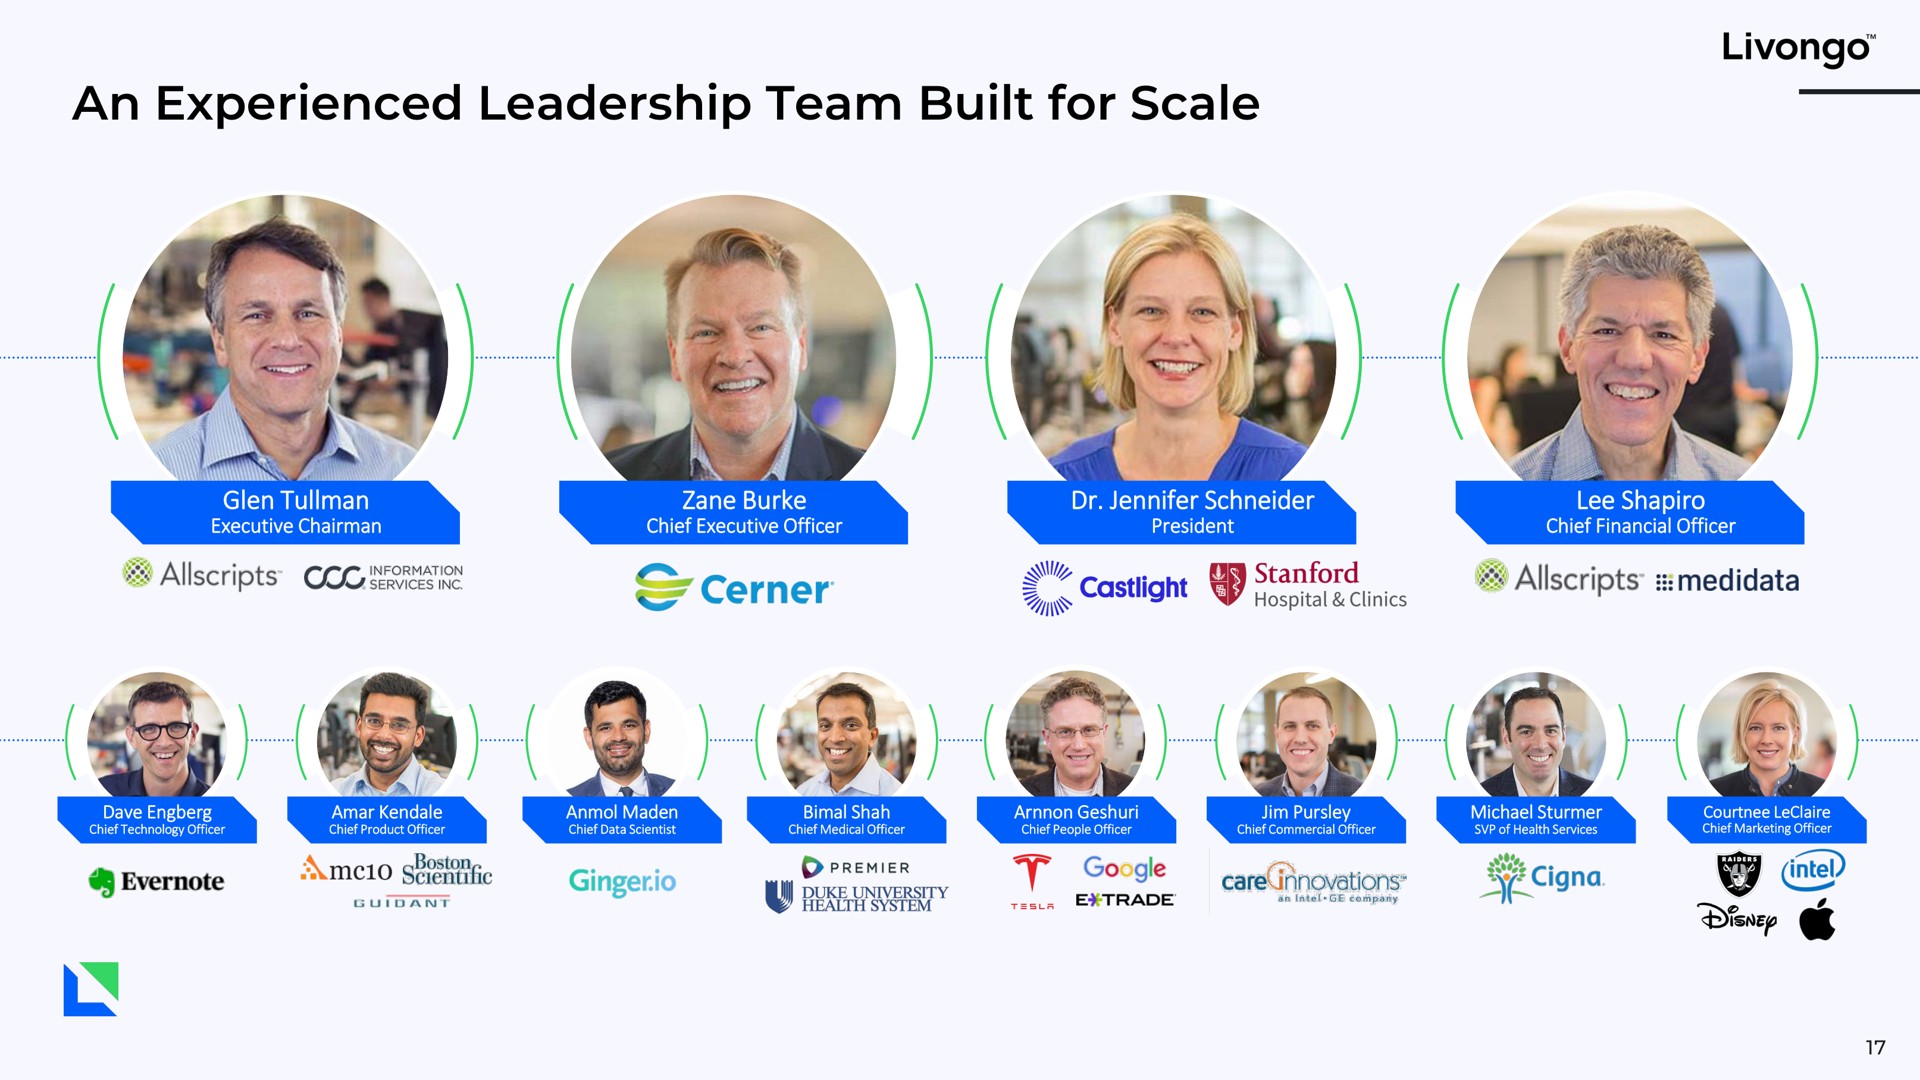 an experienced leadership team built for scale | Livongo